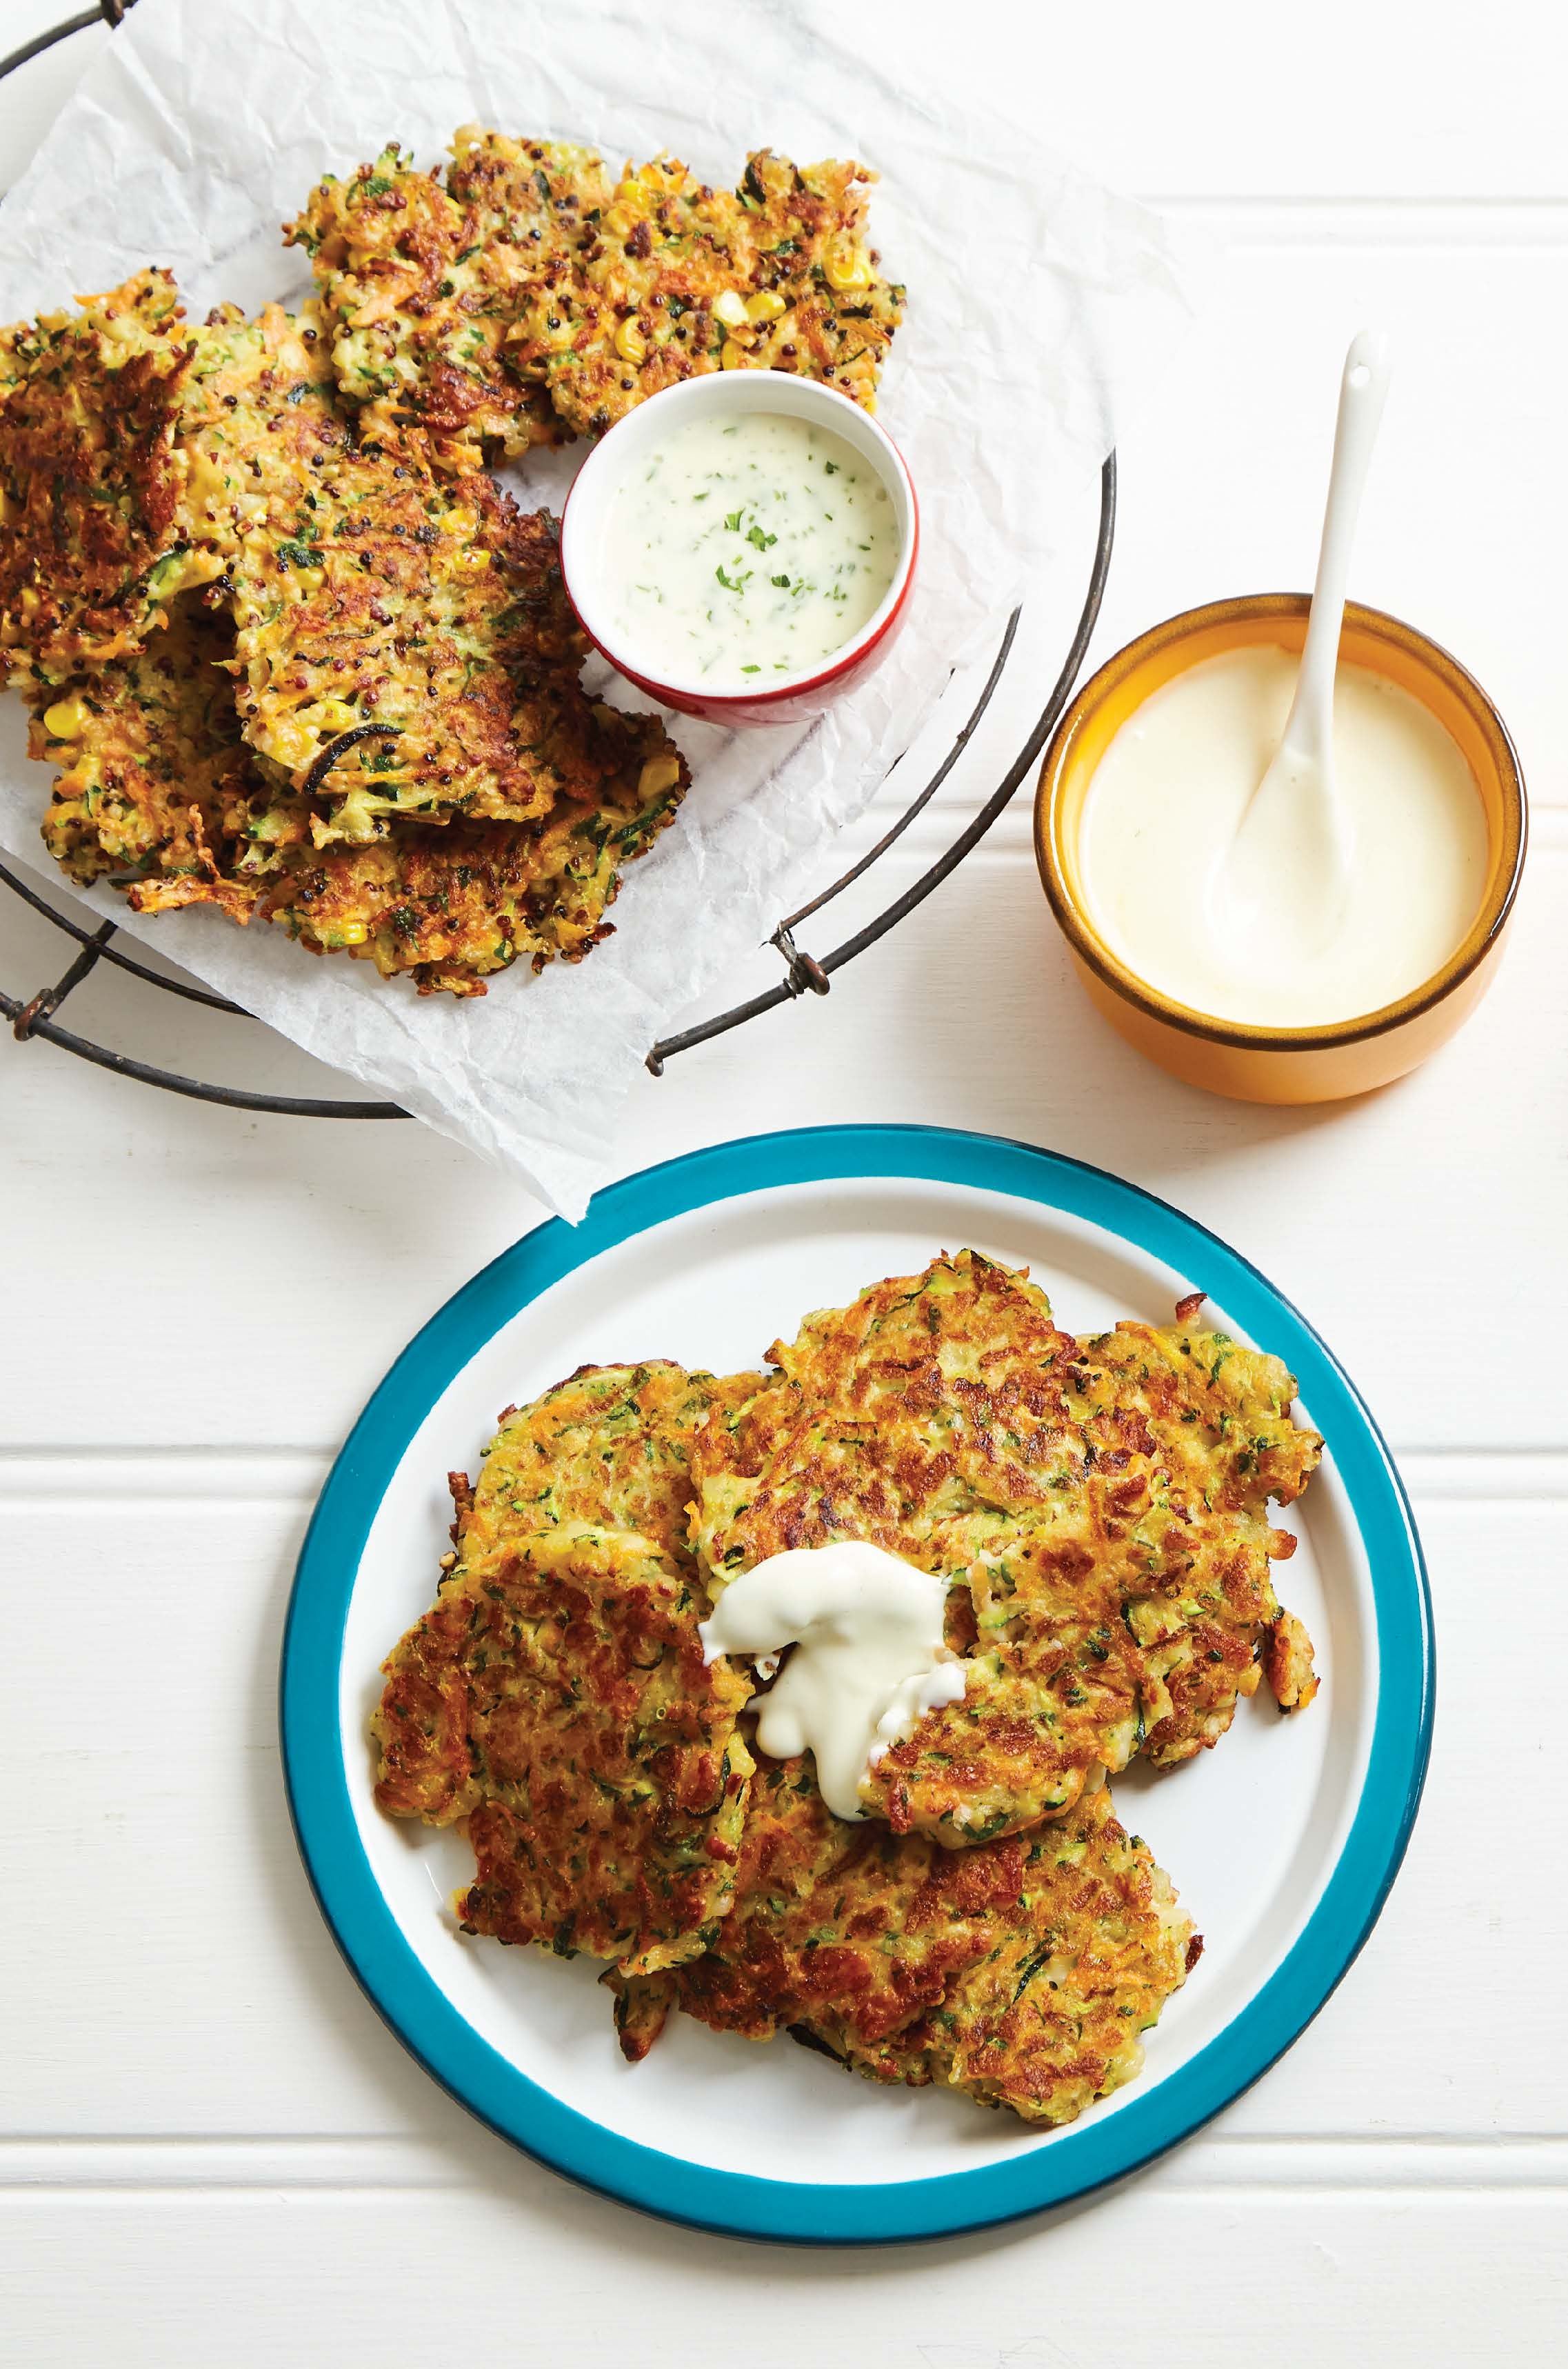 Colourful vegetable and haloumi fritters with lemon and garlic mayonnaise